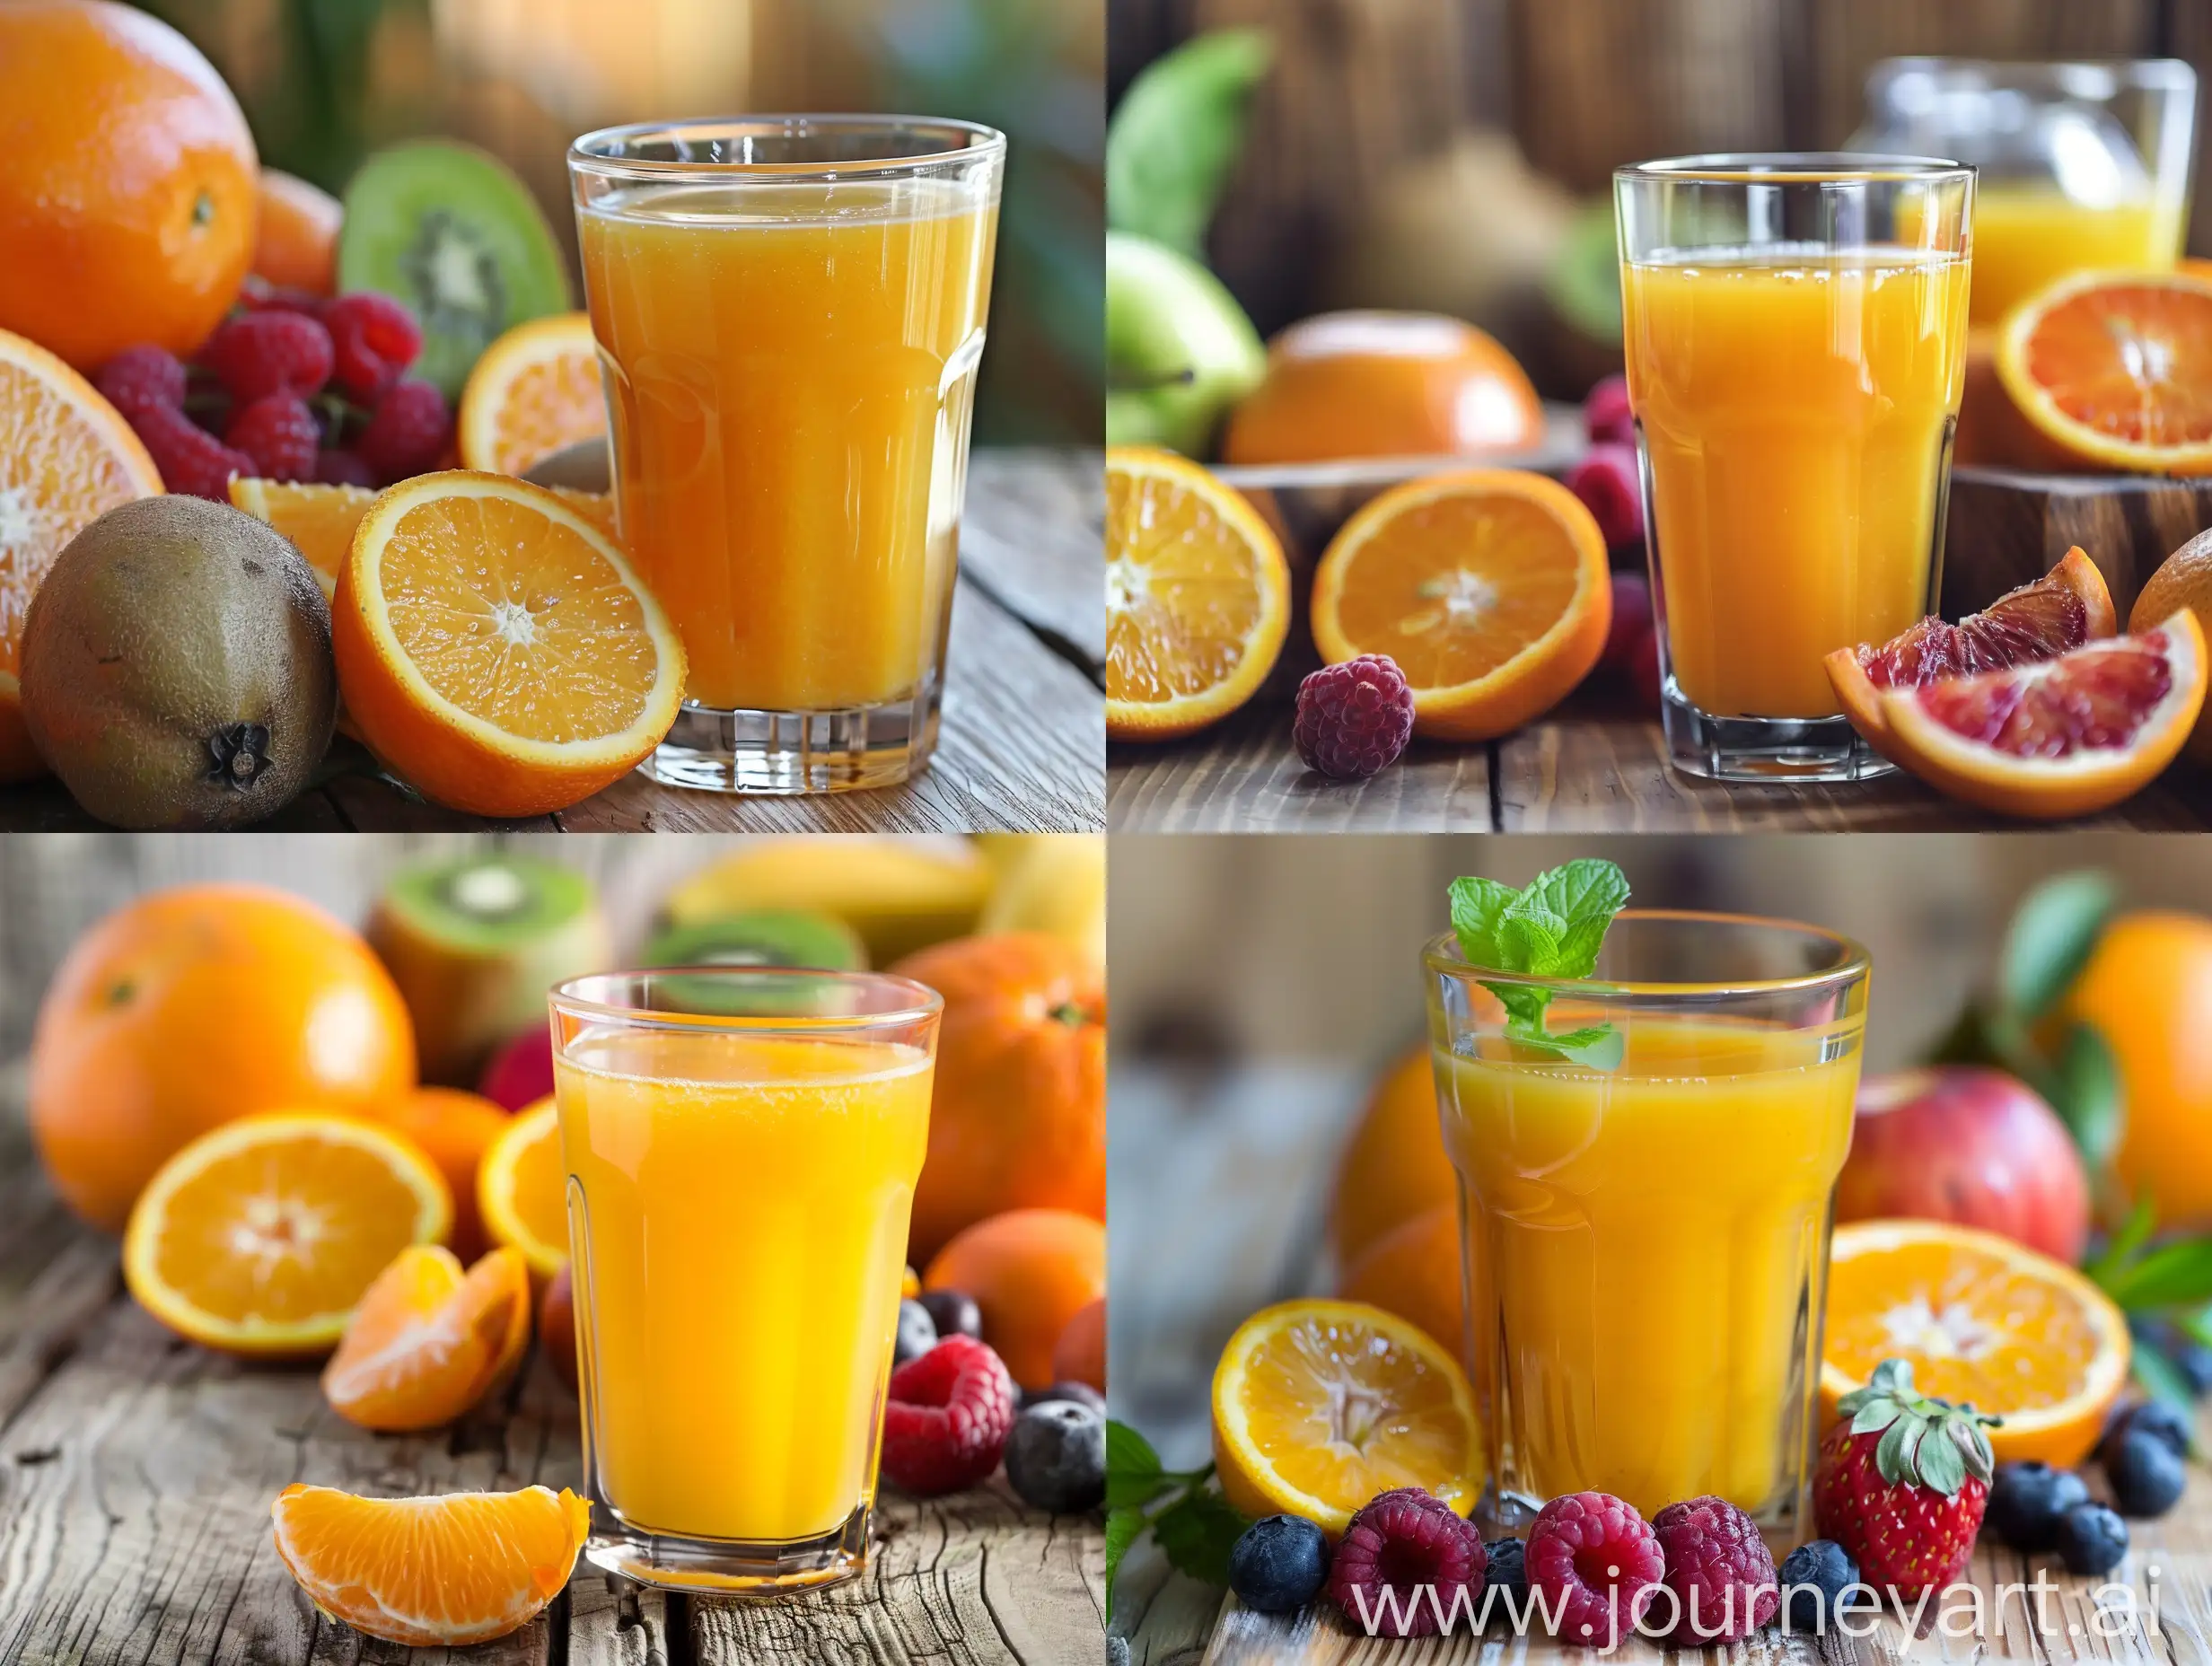 Refreshing-Glass-of-Orange-Juice-with-Fresh-Fruits-on-Wooden-Table